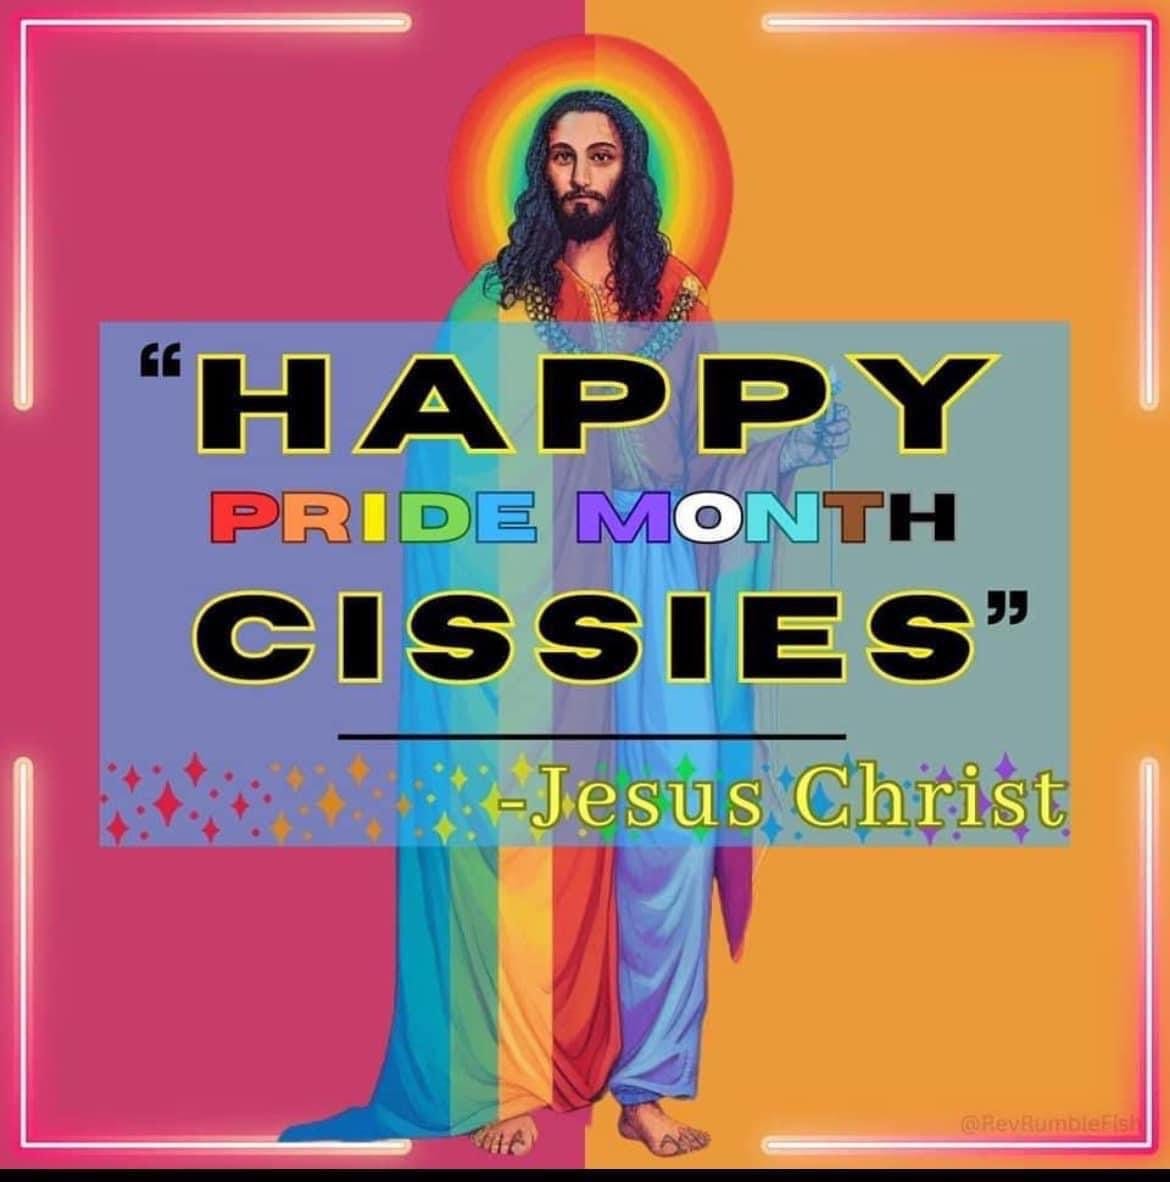 A picture of Jesus Christ on a pink and orange background, wearing a rainbow robe and halo, saying "Happy Pride Month Cissies"